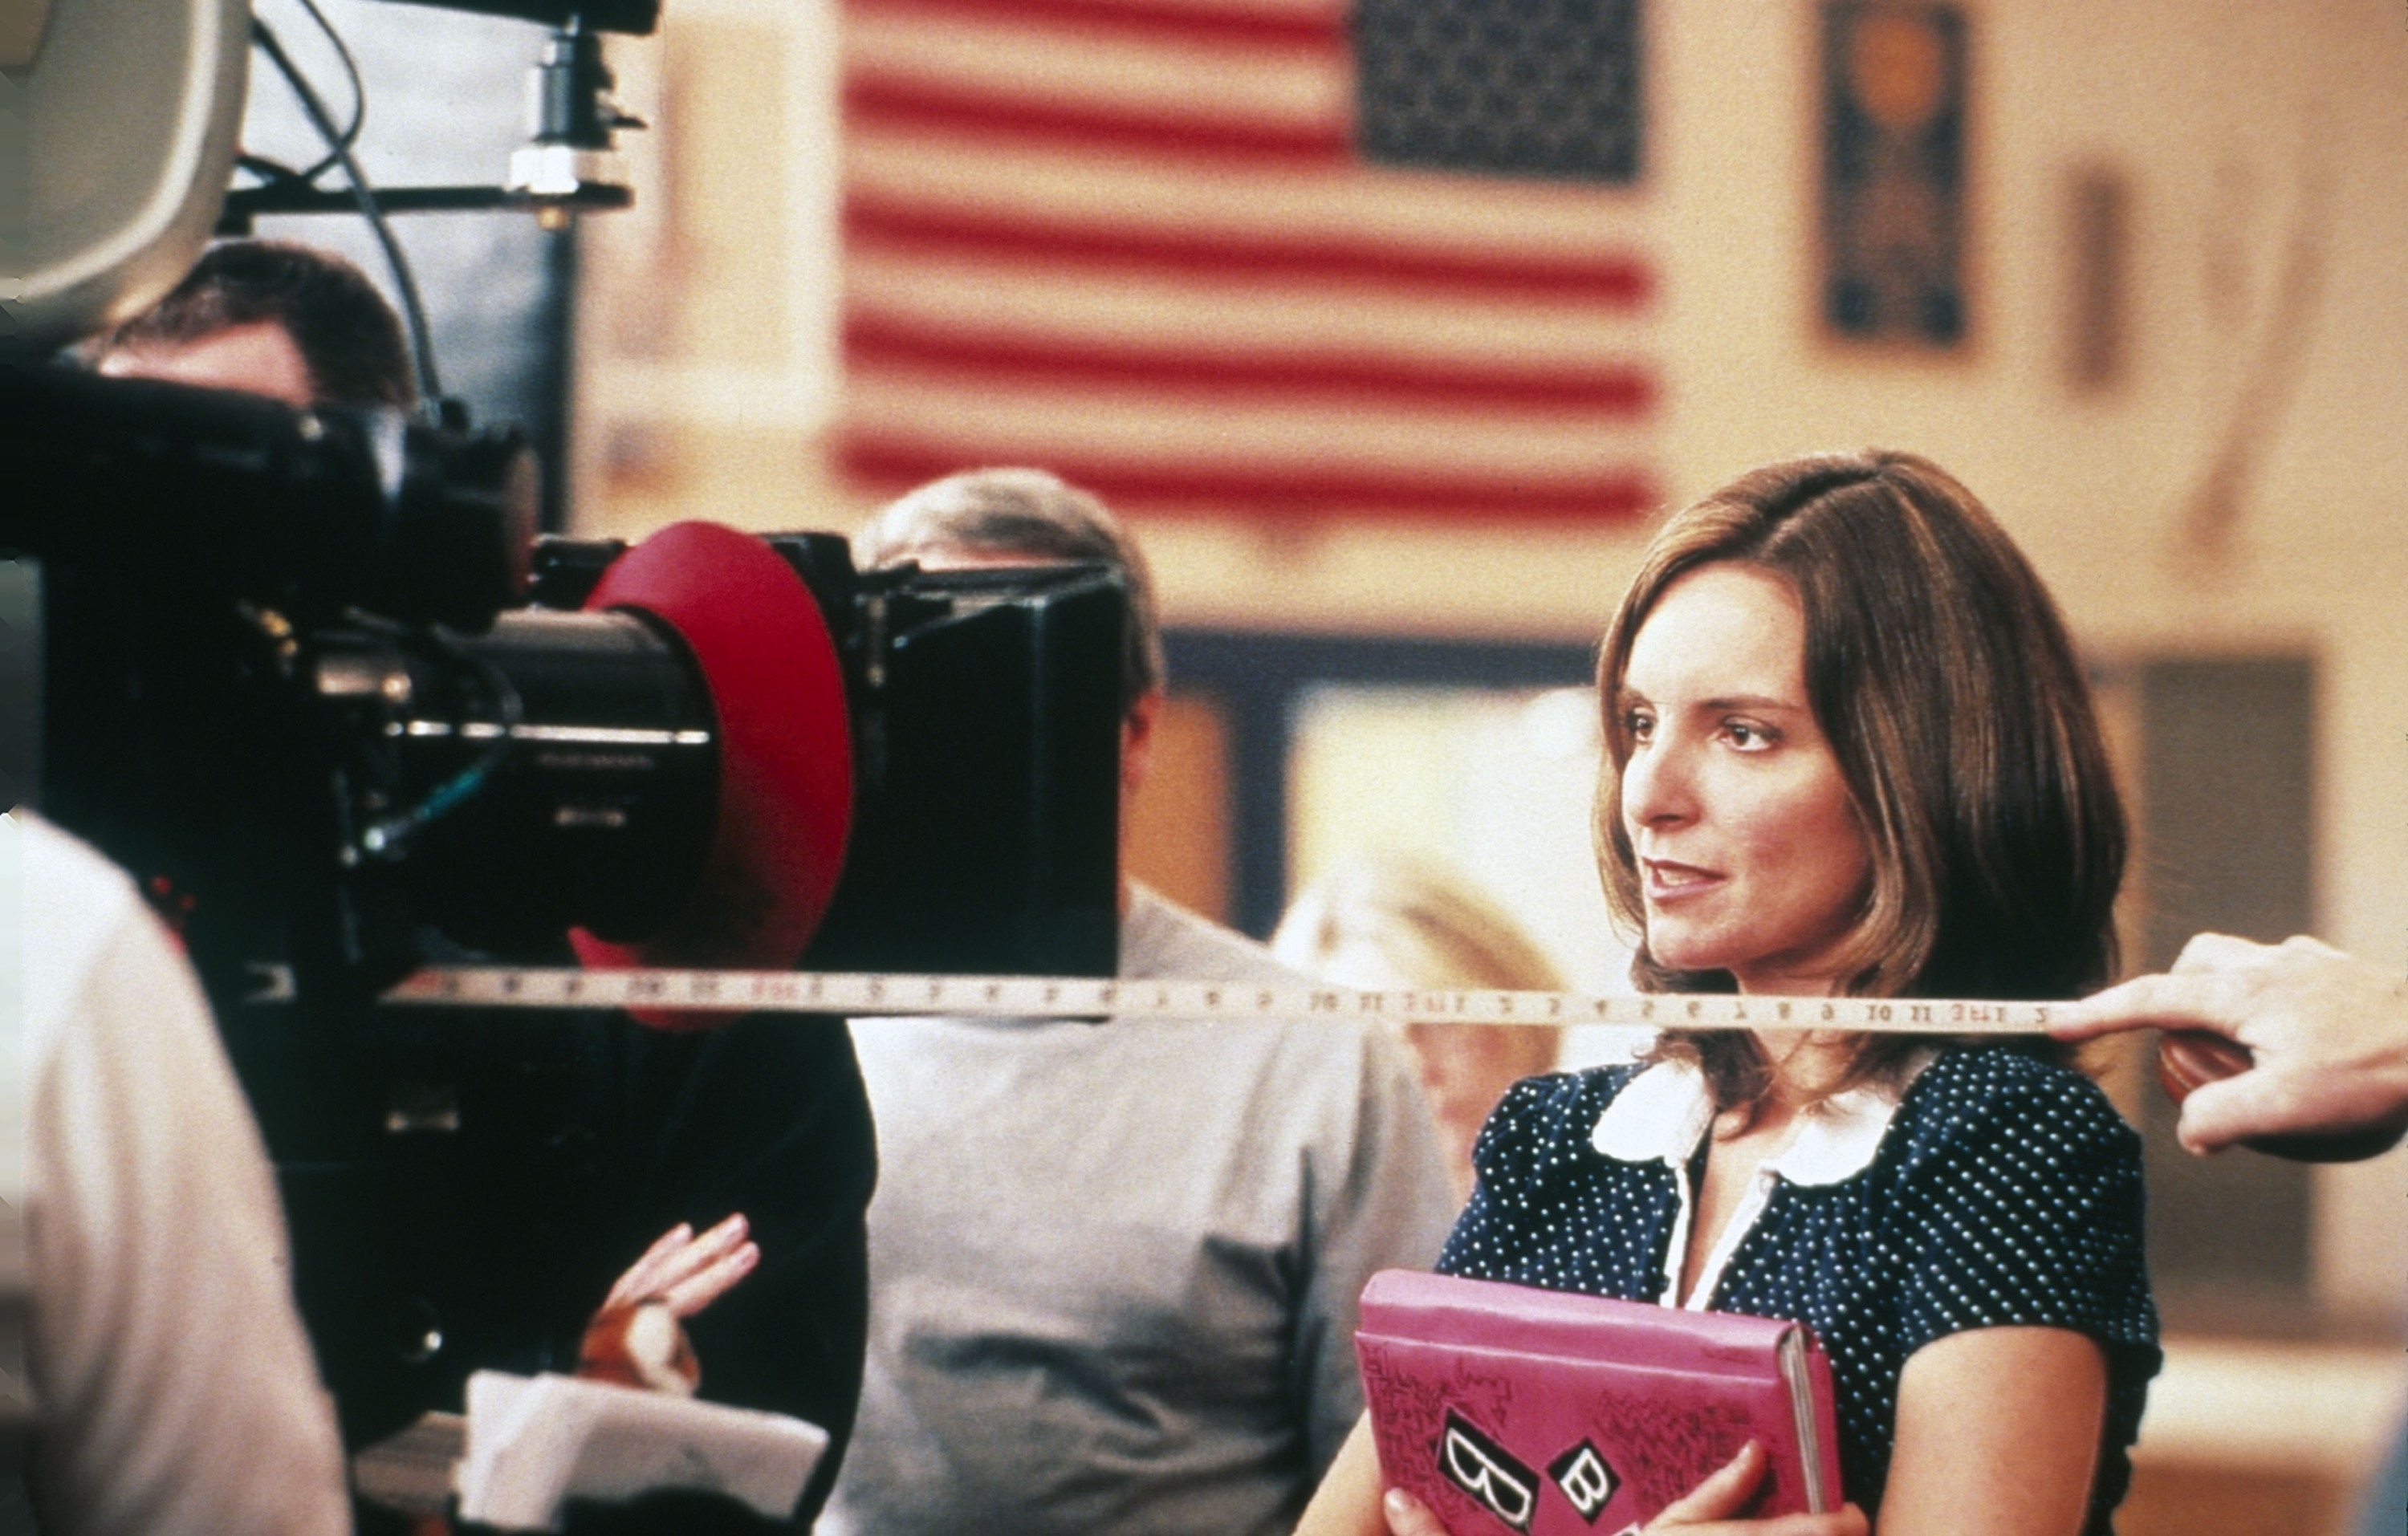 Tina Fey on a film set, holding a pink binder, with an American flag in the background. Crew members are adjusting equipment around her